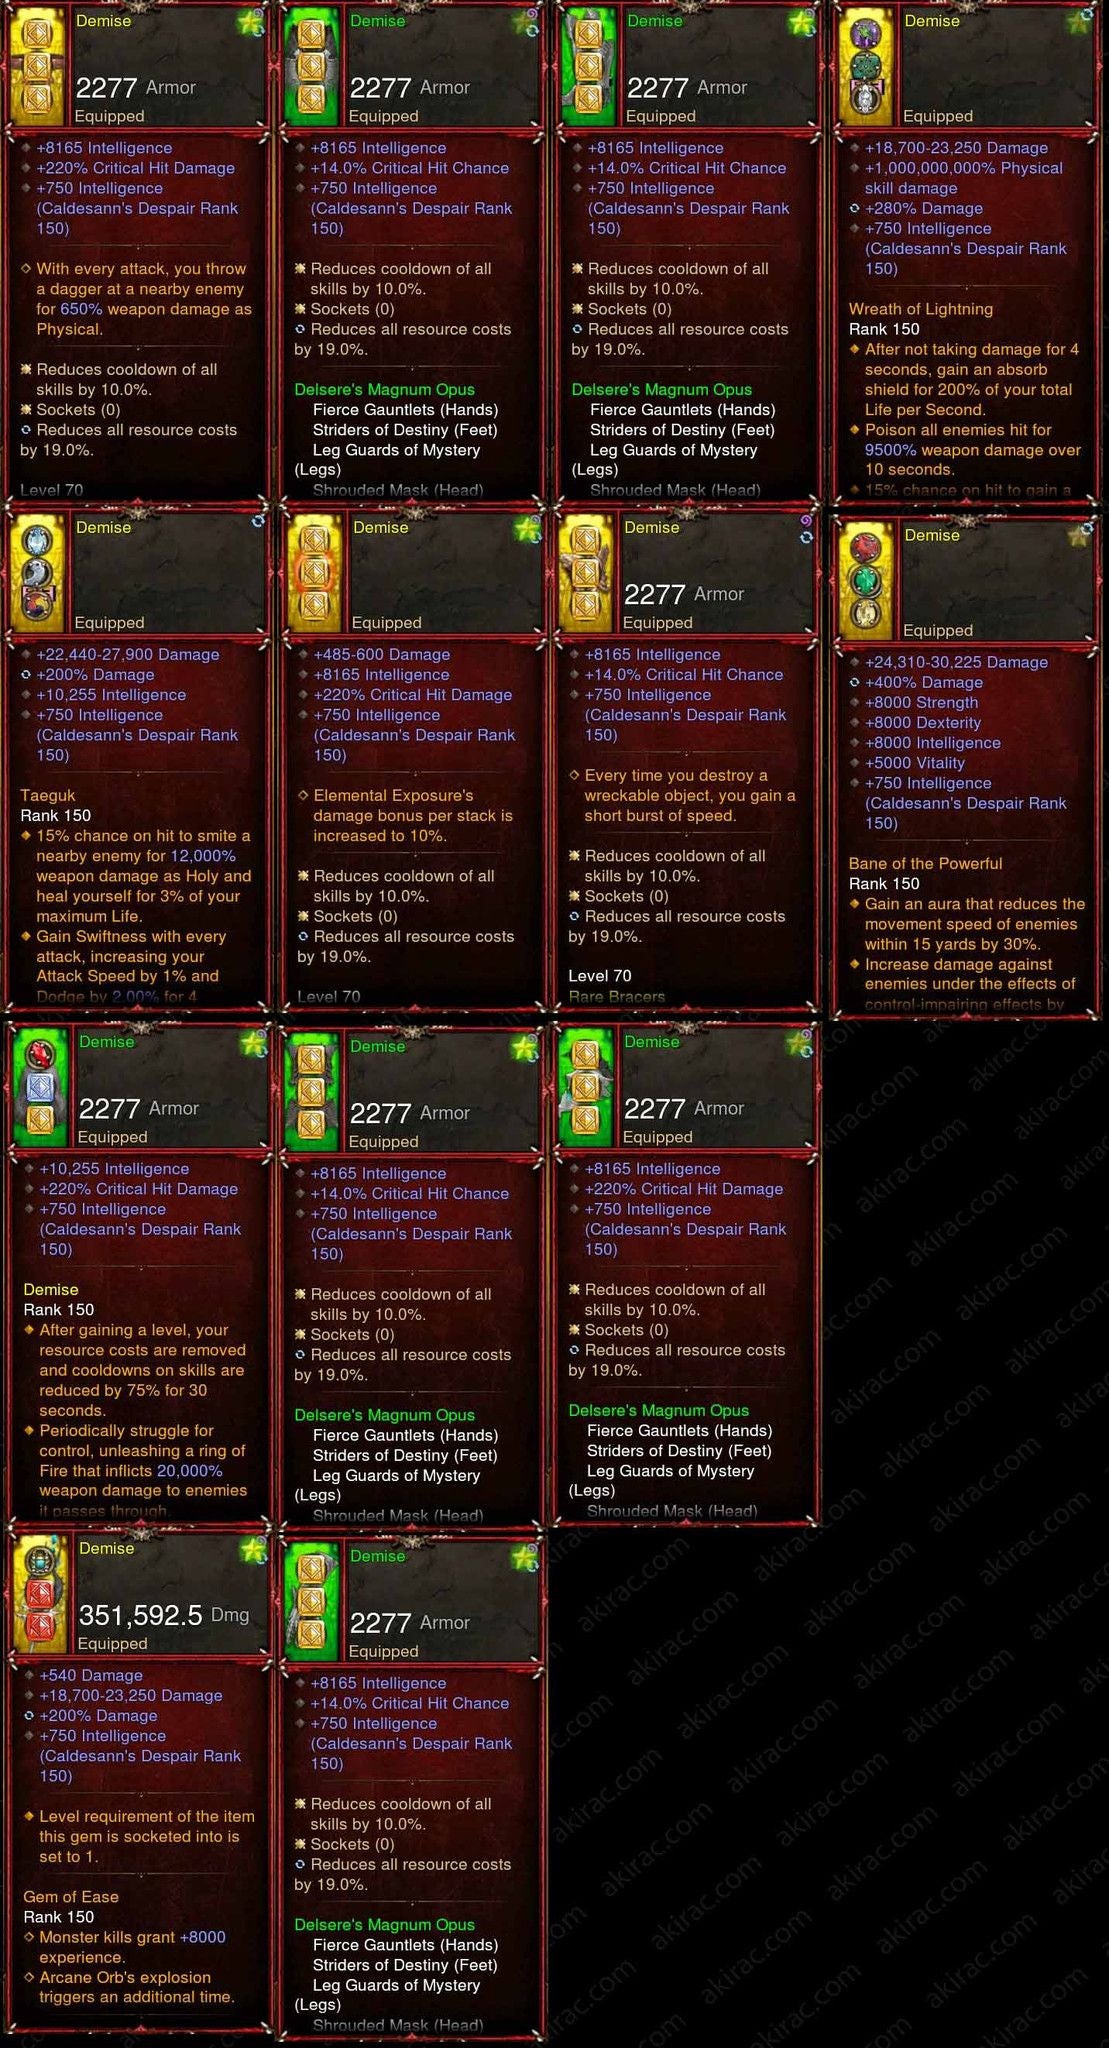 [Primal Ancient] Diablo 3 Immortal v3 Magnum Opus Wizard Demise Diablo 3 Mods ROS Seasonal and Non Seasonal Save Mod - Modded Items and Gear - Hacks - Cheats - Trainers for Playstation 4 - Playstation 5 - Nintendo Switch - Xbox One